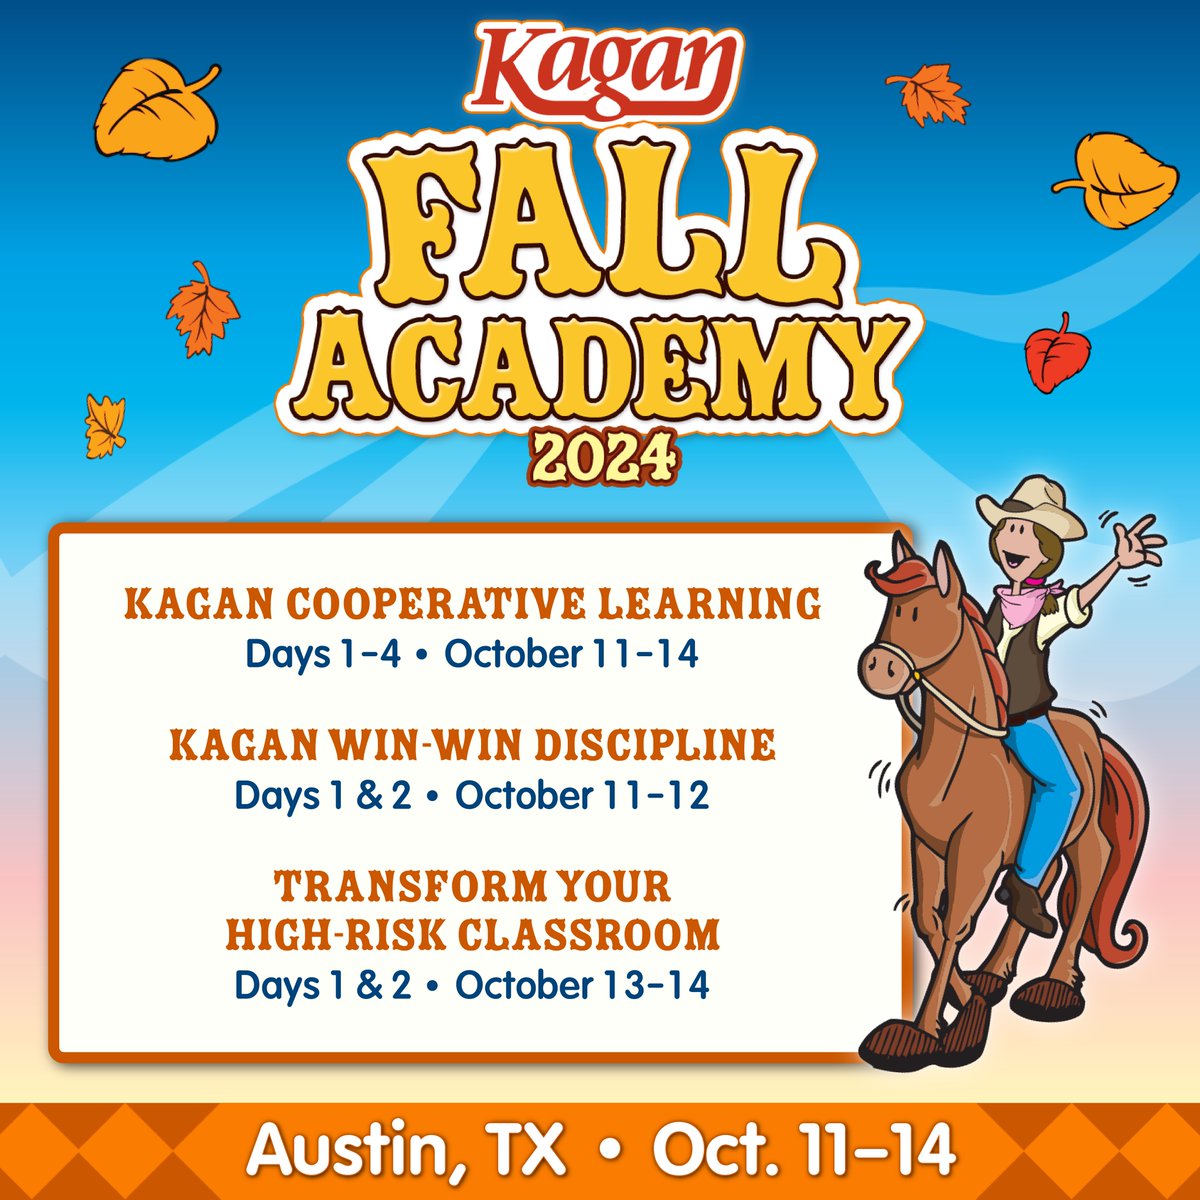 Mark your calendars! #Kagan is coming to Austin, Texas this October for our 2024 Fall Academy 🤠 Choose from our signature Cooperative Learning, Win-Win Discipline, or High-Risk Classroom training. Registration is open now, don’t miss out: kaganonline.com/workshops/fall…